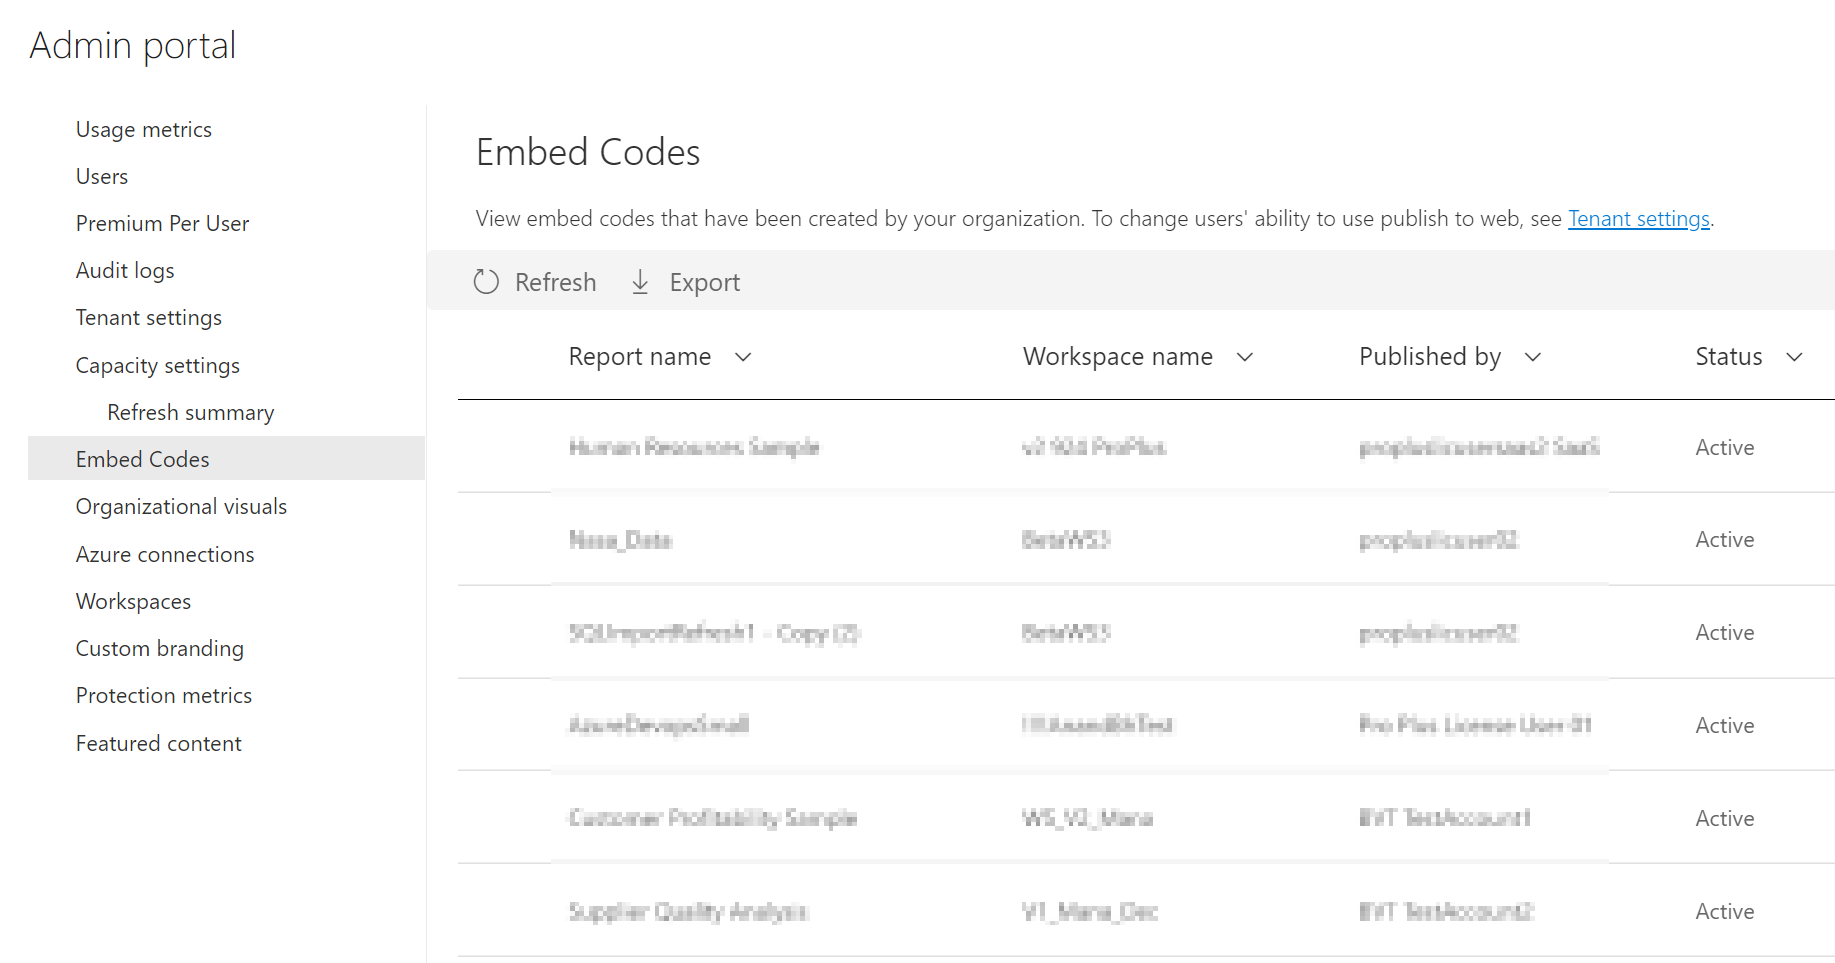 Screenshot that shows the embed codes within the Fabric admin portal.